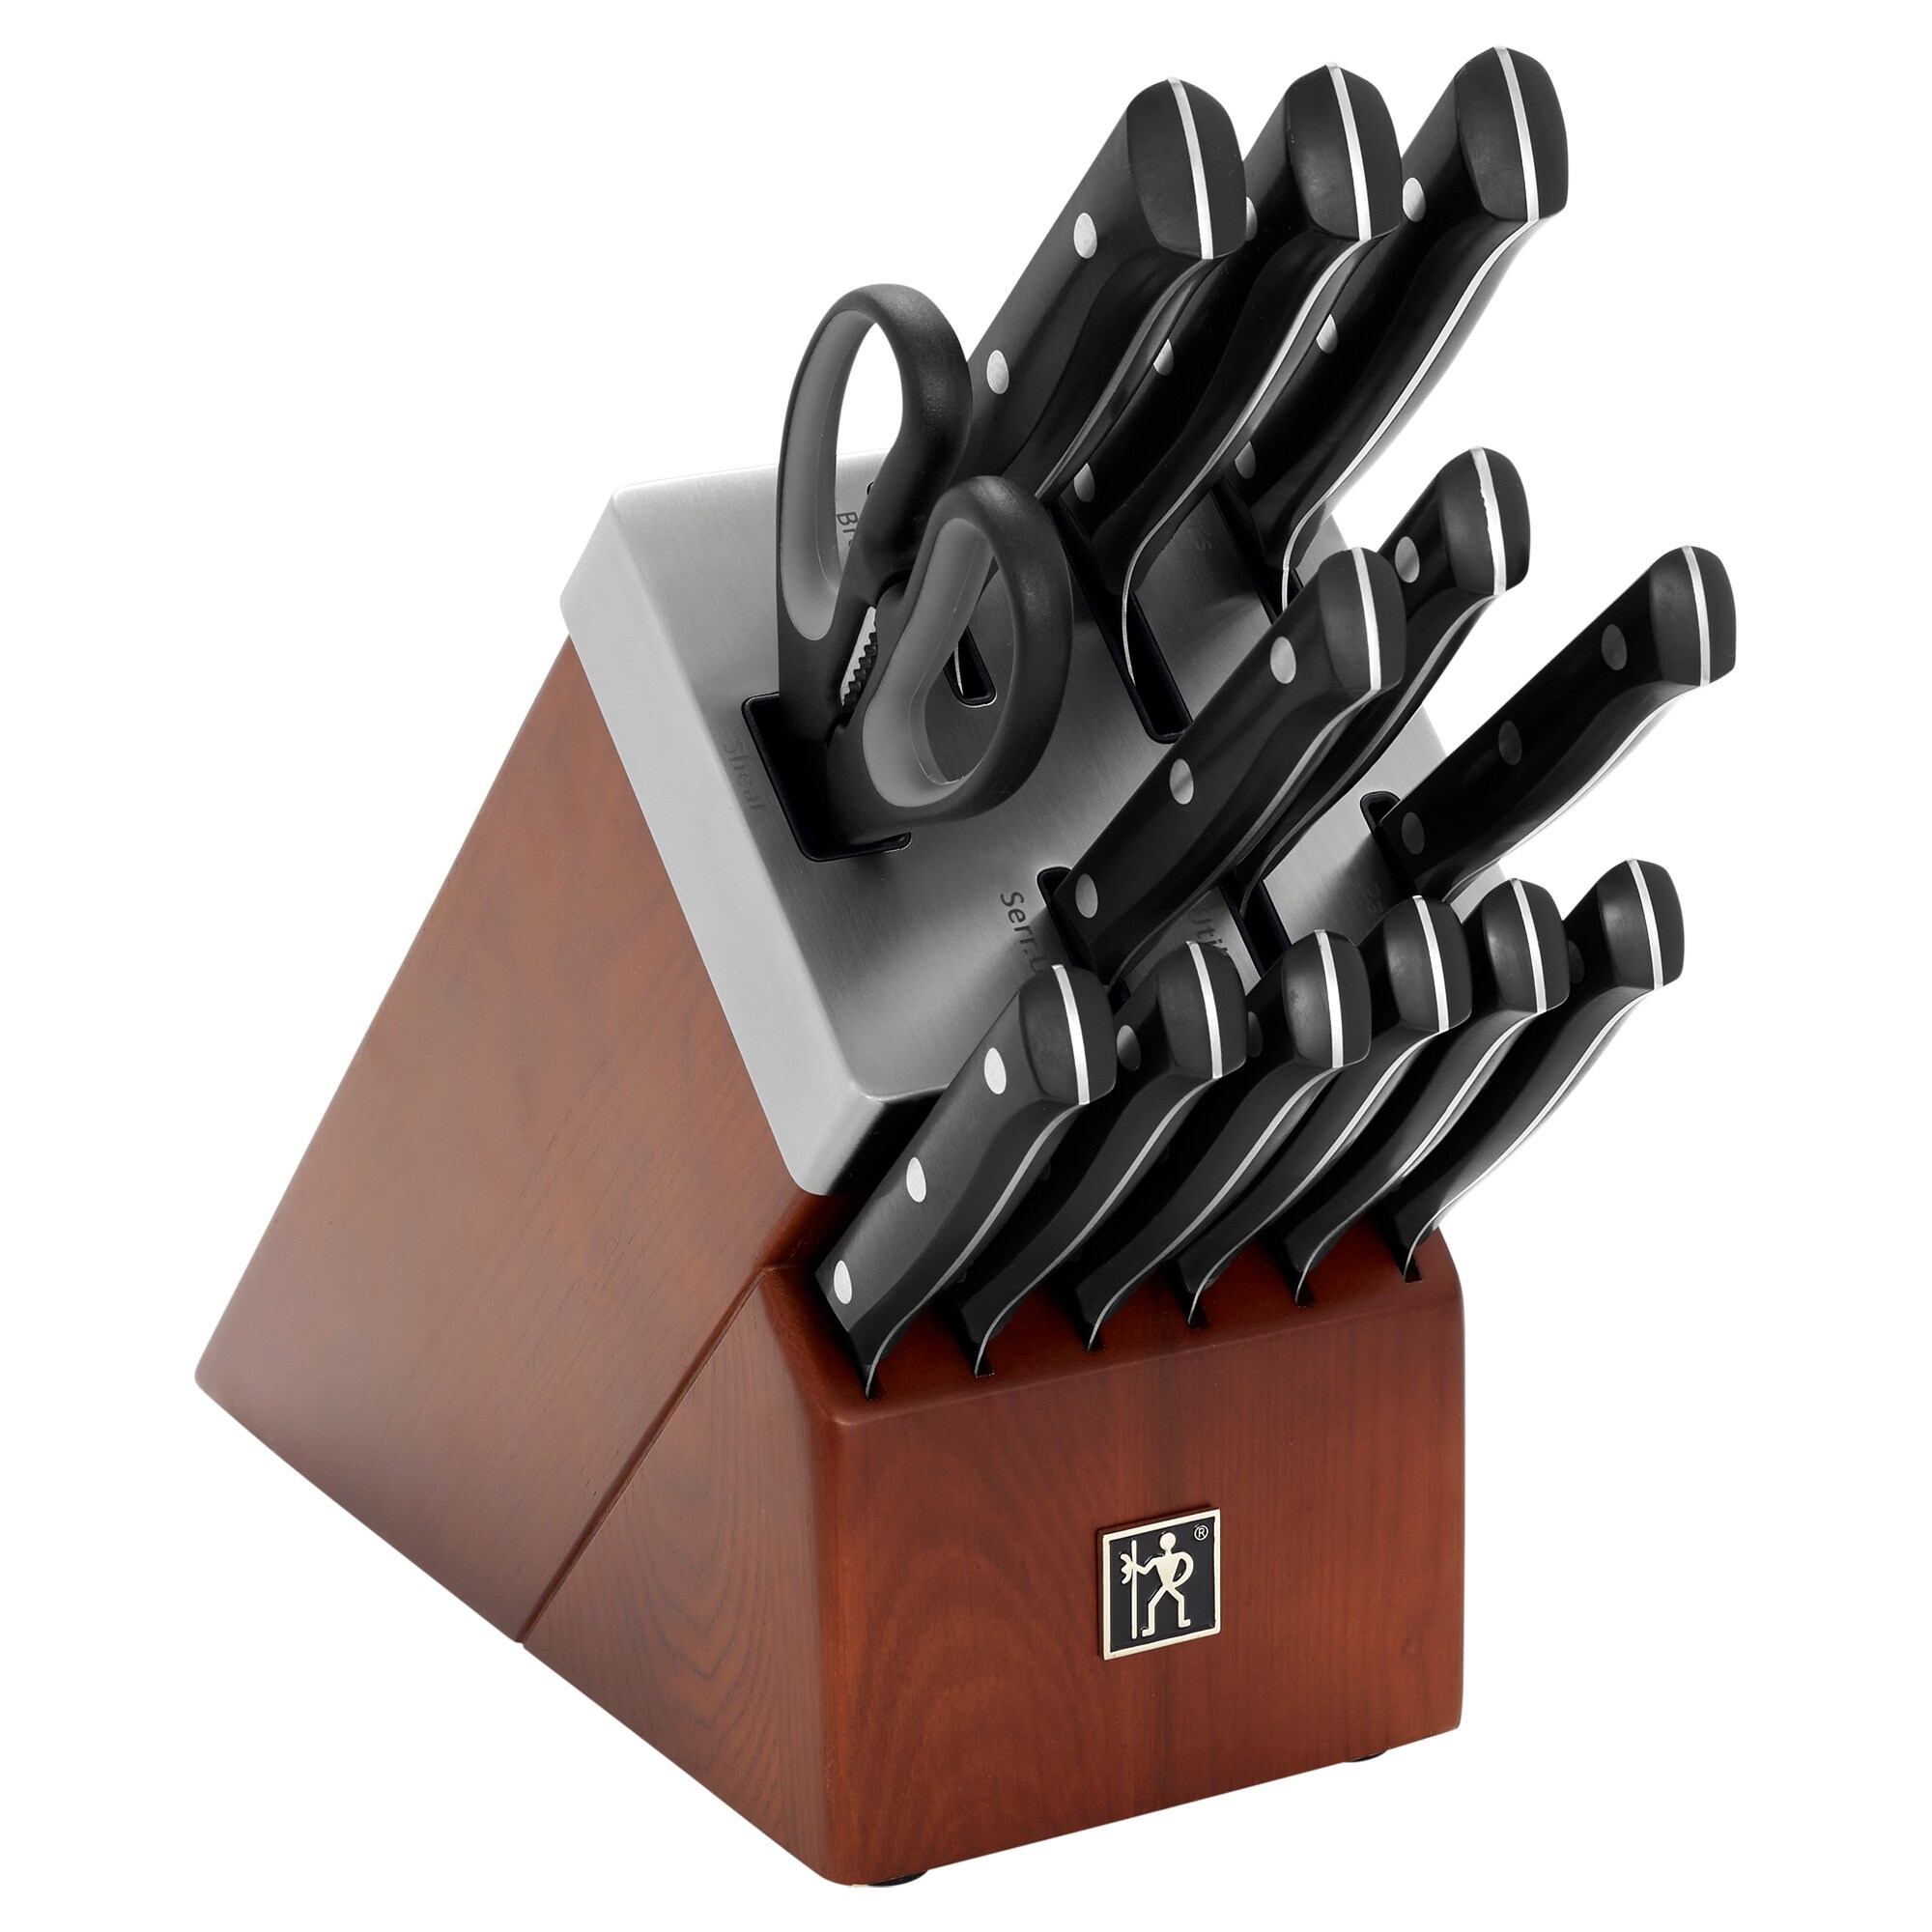 https://ak1.ostkcdn.com/images/products/is/images/direct/bba6b8422763d2bf41c1466b358e5910256d48be/HENCKELS-Dynamic-Self-Sharpening-Knife-Block-Set.jpg